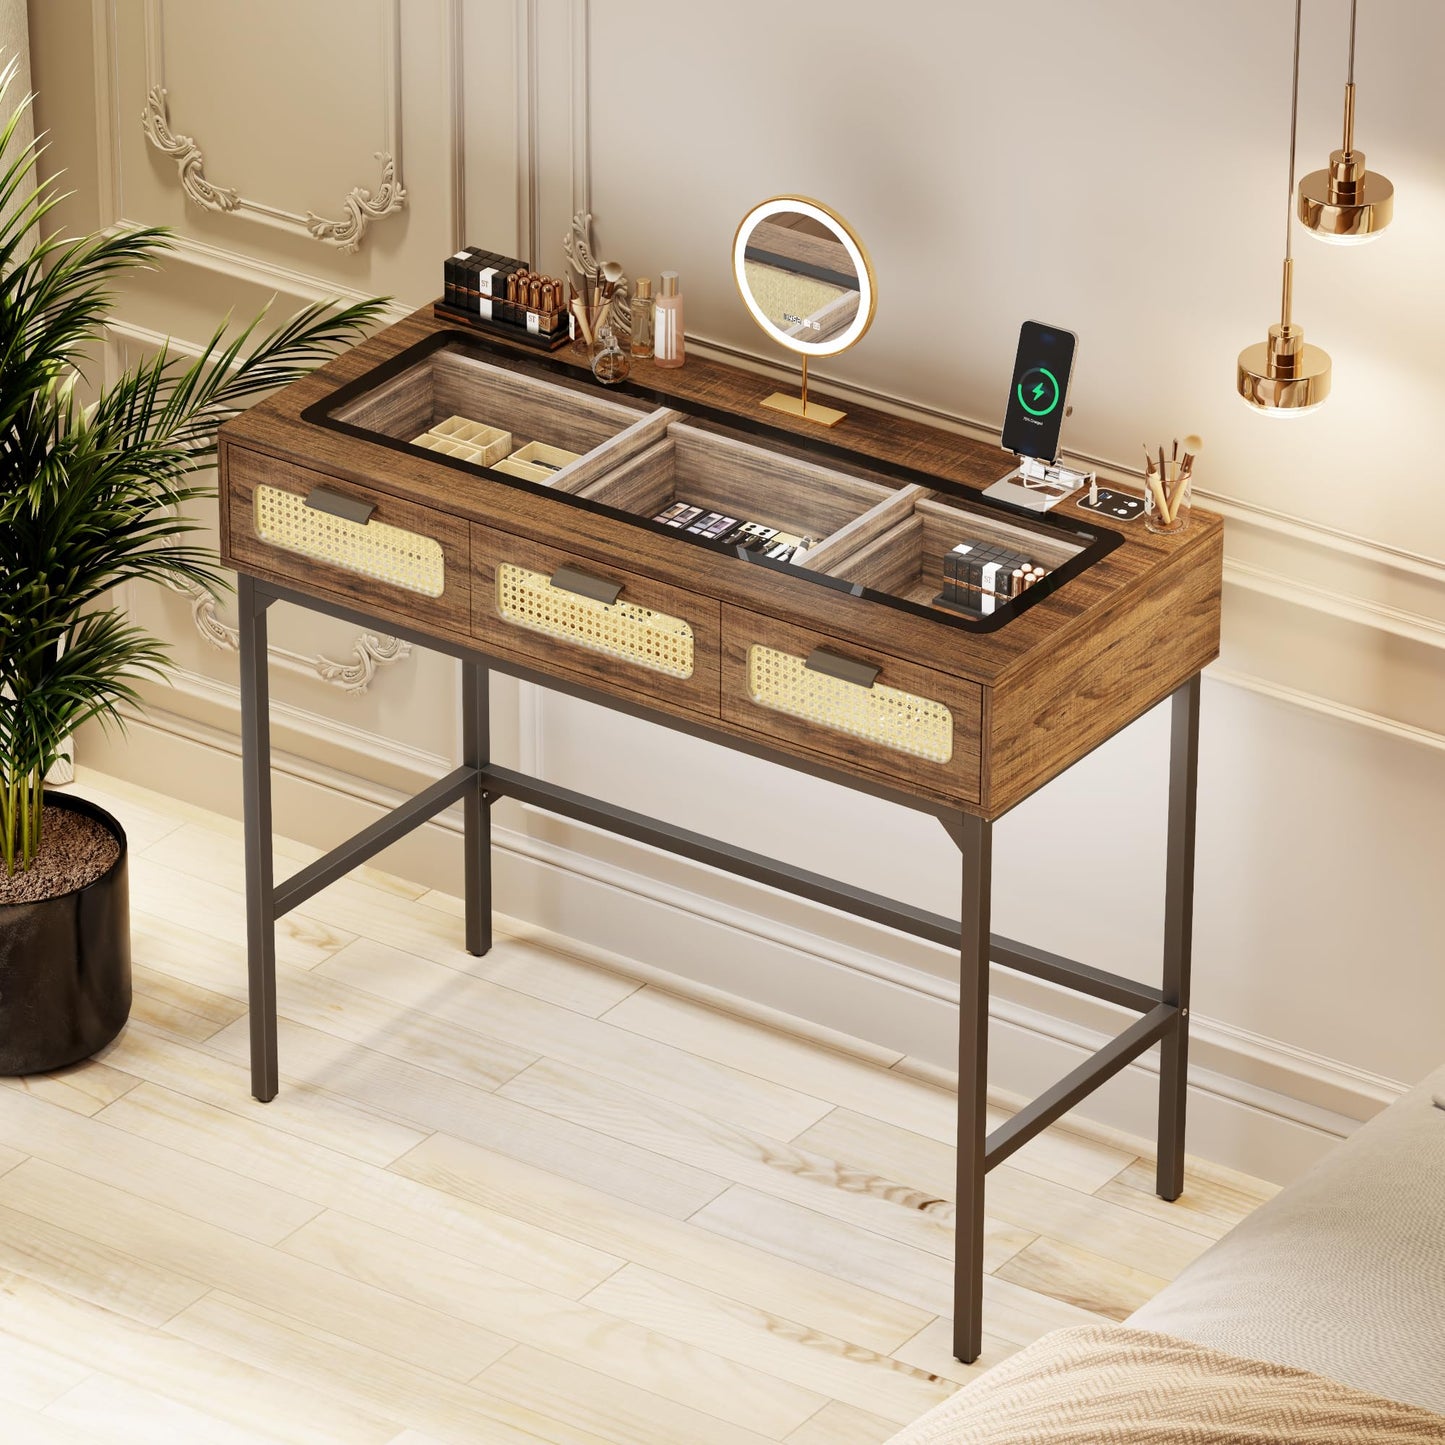 FREDEES Makeup Vanity Desk with Lights - Vanity Table with Glass Top Design & Charging Station, Vintage Makeup Desk with Rattan Drawers, Rustic Brown